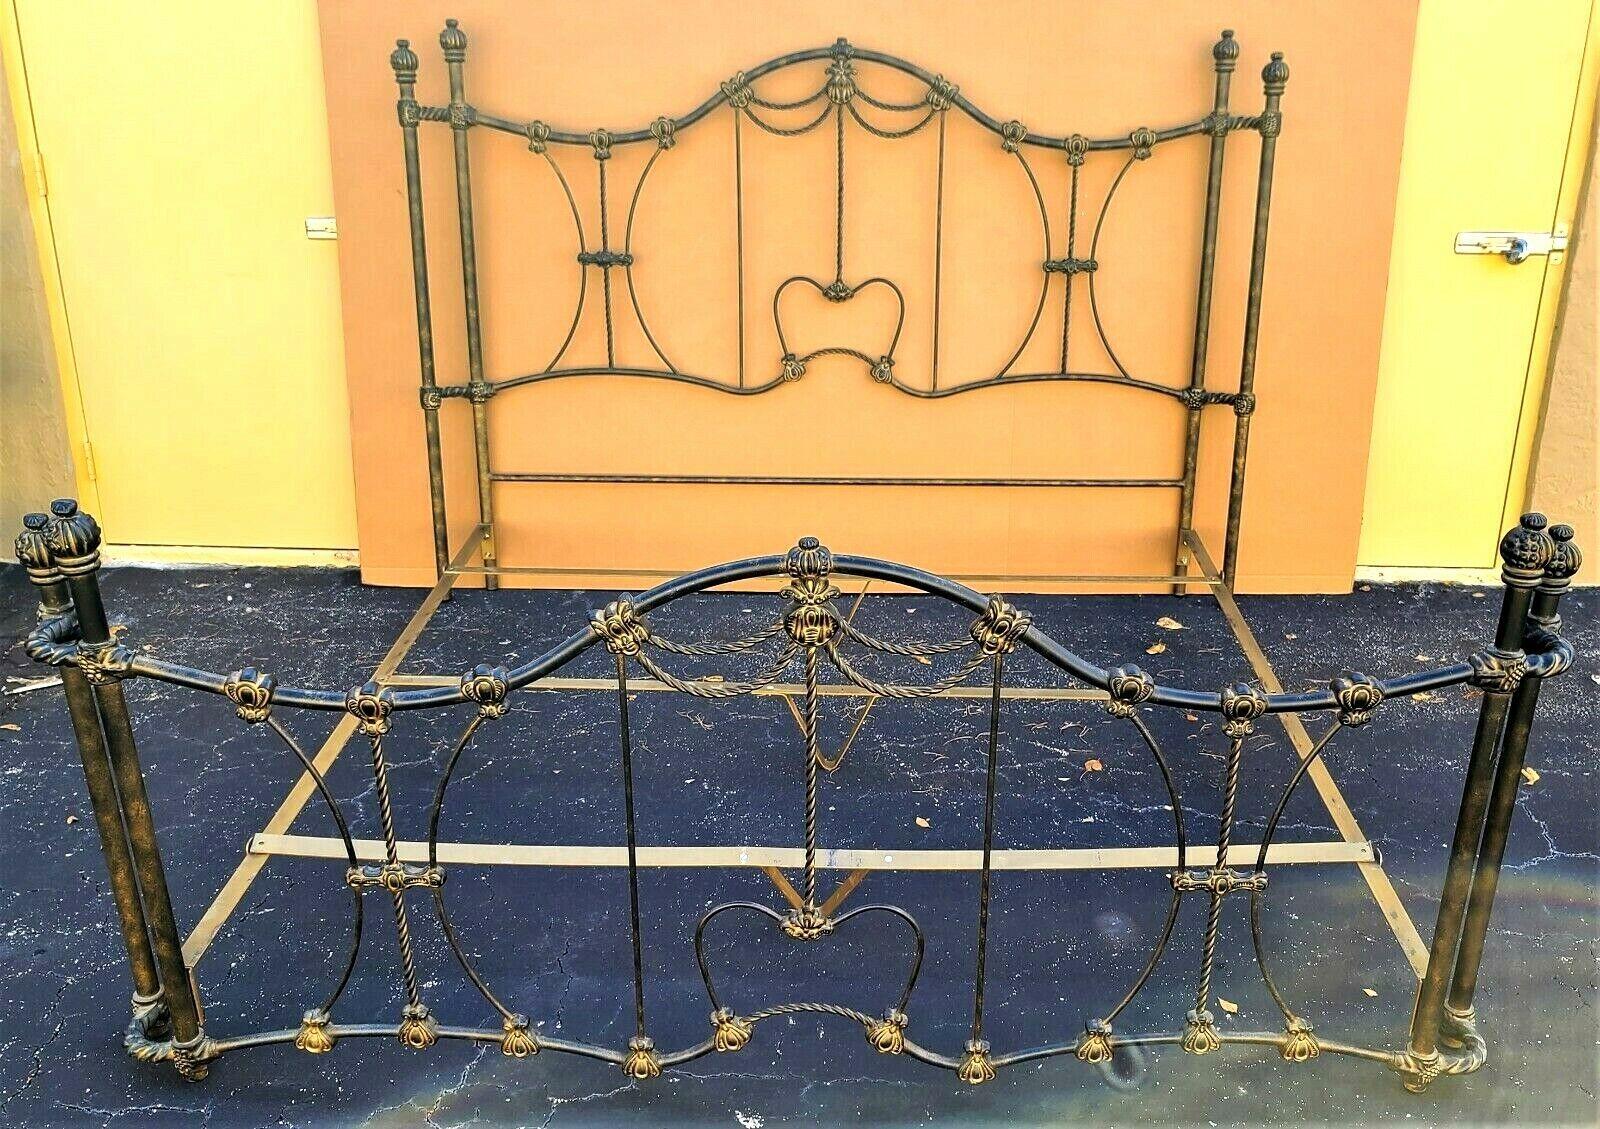 For full item description click on continue reading at the bottom of this page.

Offering one of our recent Palm Beach estate fine furniture acquisitions of a
magnificent vintage ornate French style patinated iron/metal king size 8 post